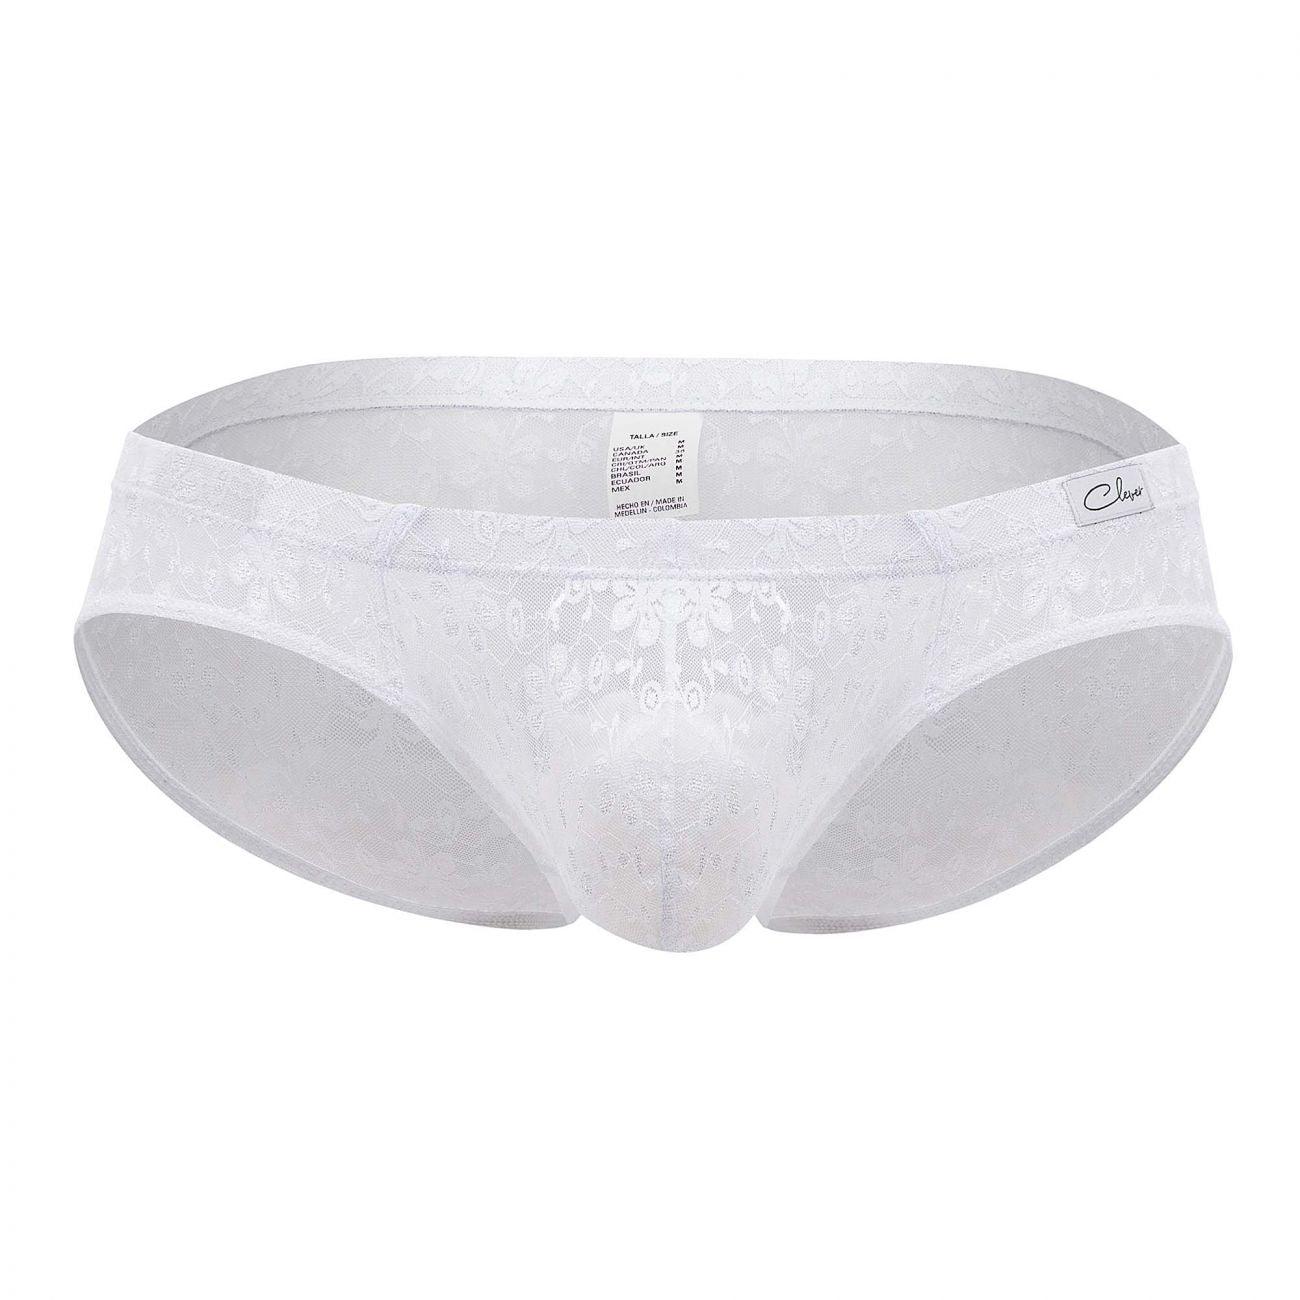 image of product,Fantasy Briefs - SEXYEONE